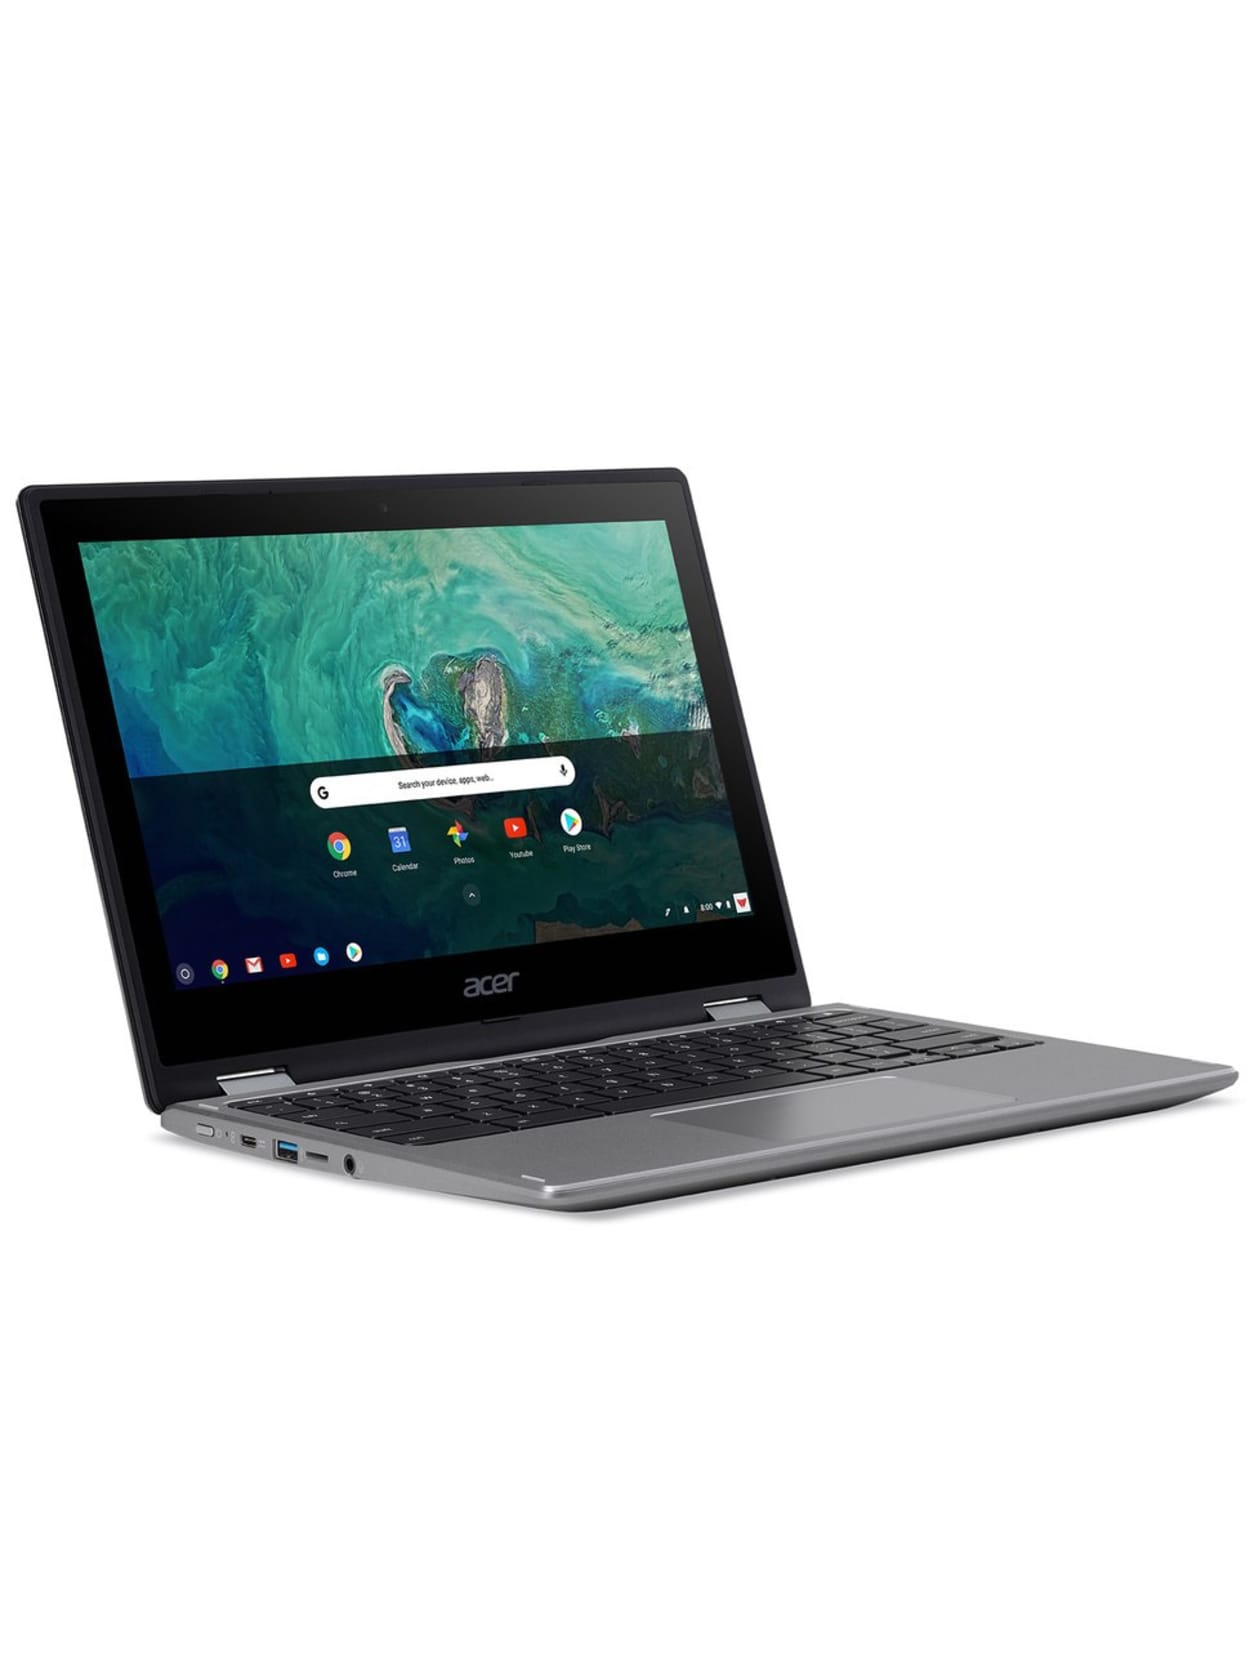 Acer Chromebook Spin 11 Refurbished 2 In 1 Laptop 11 6 Touch